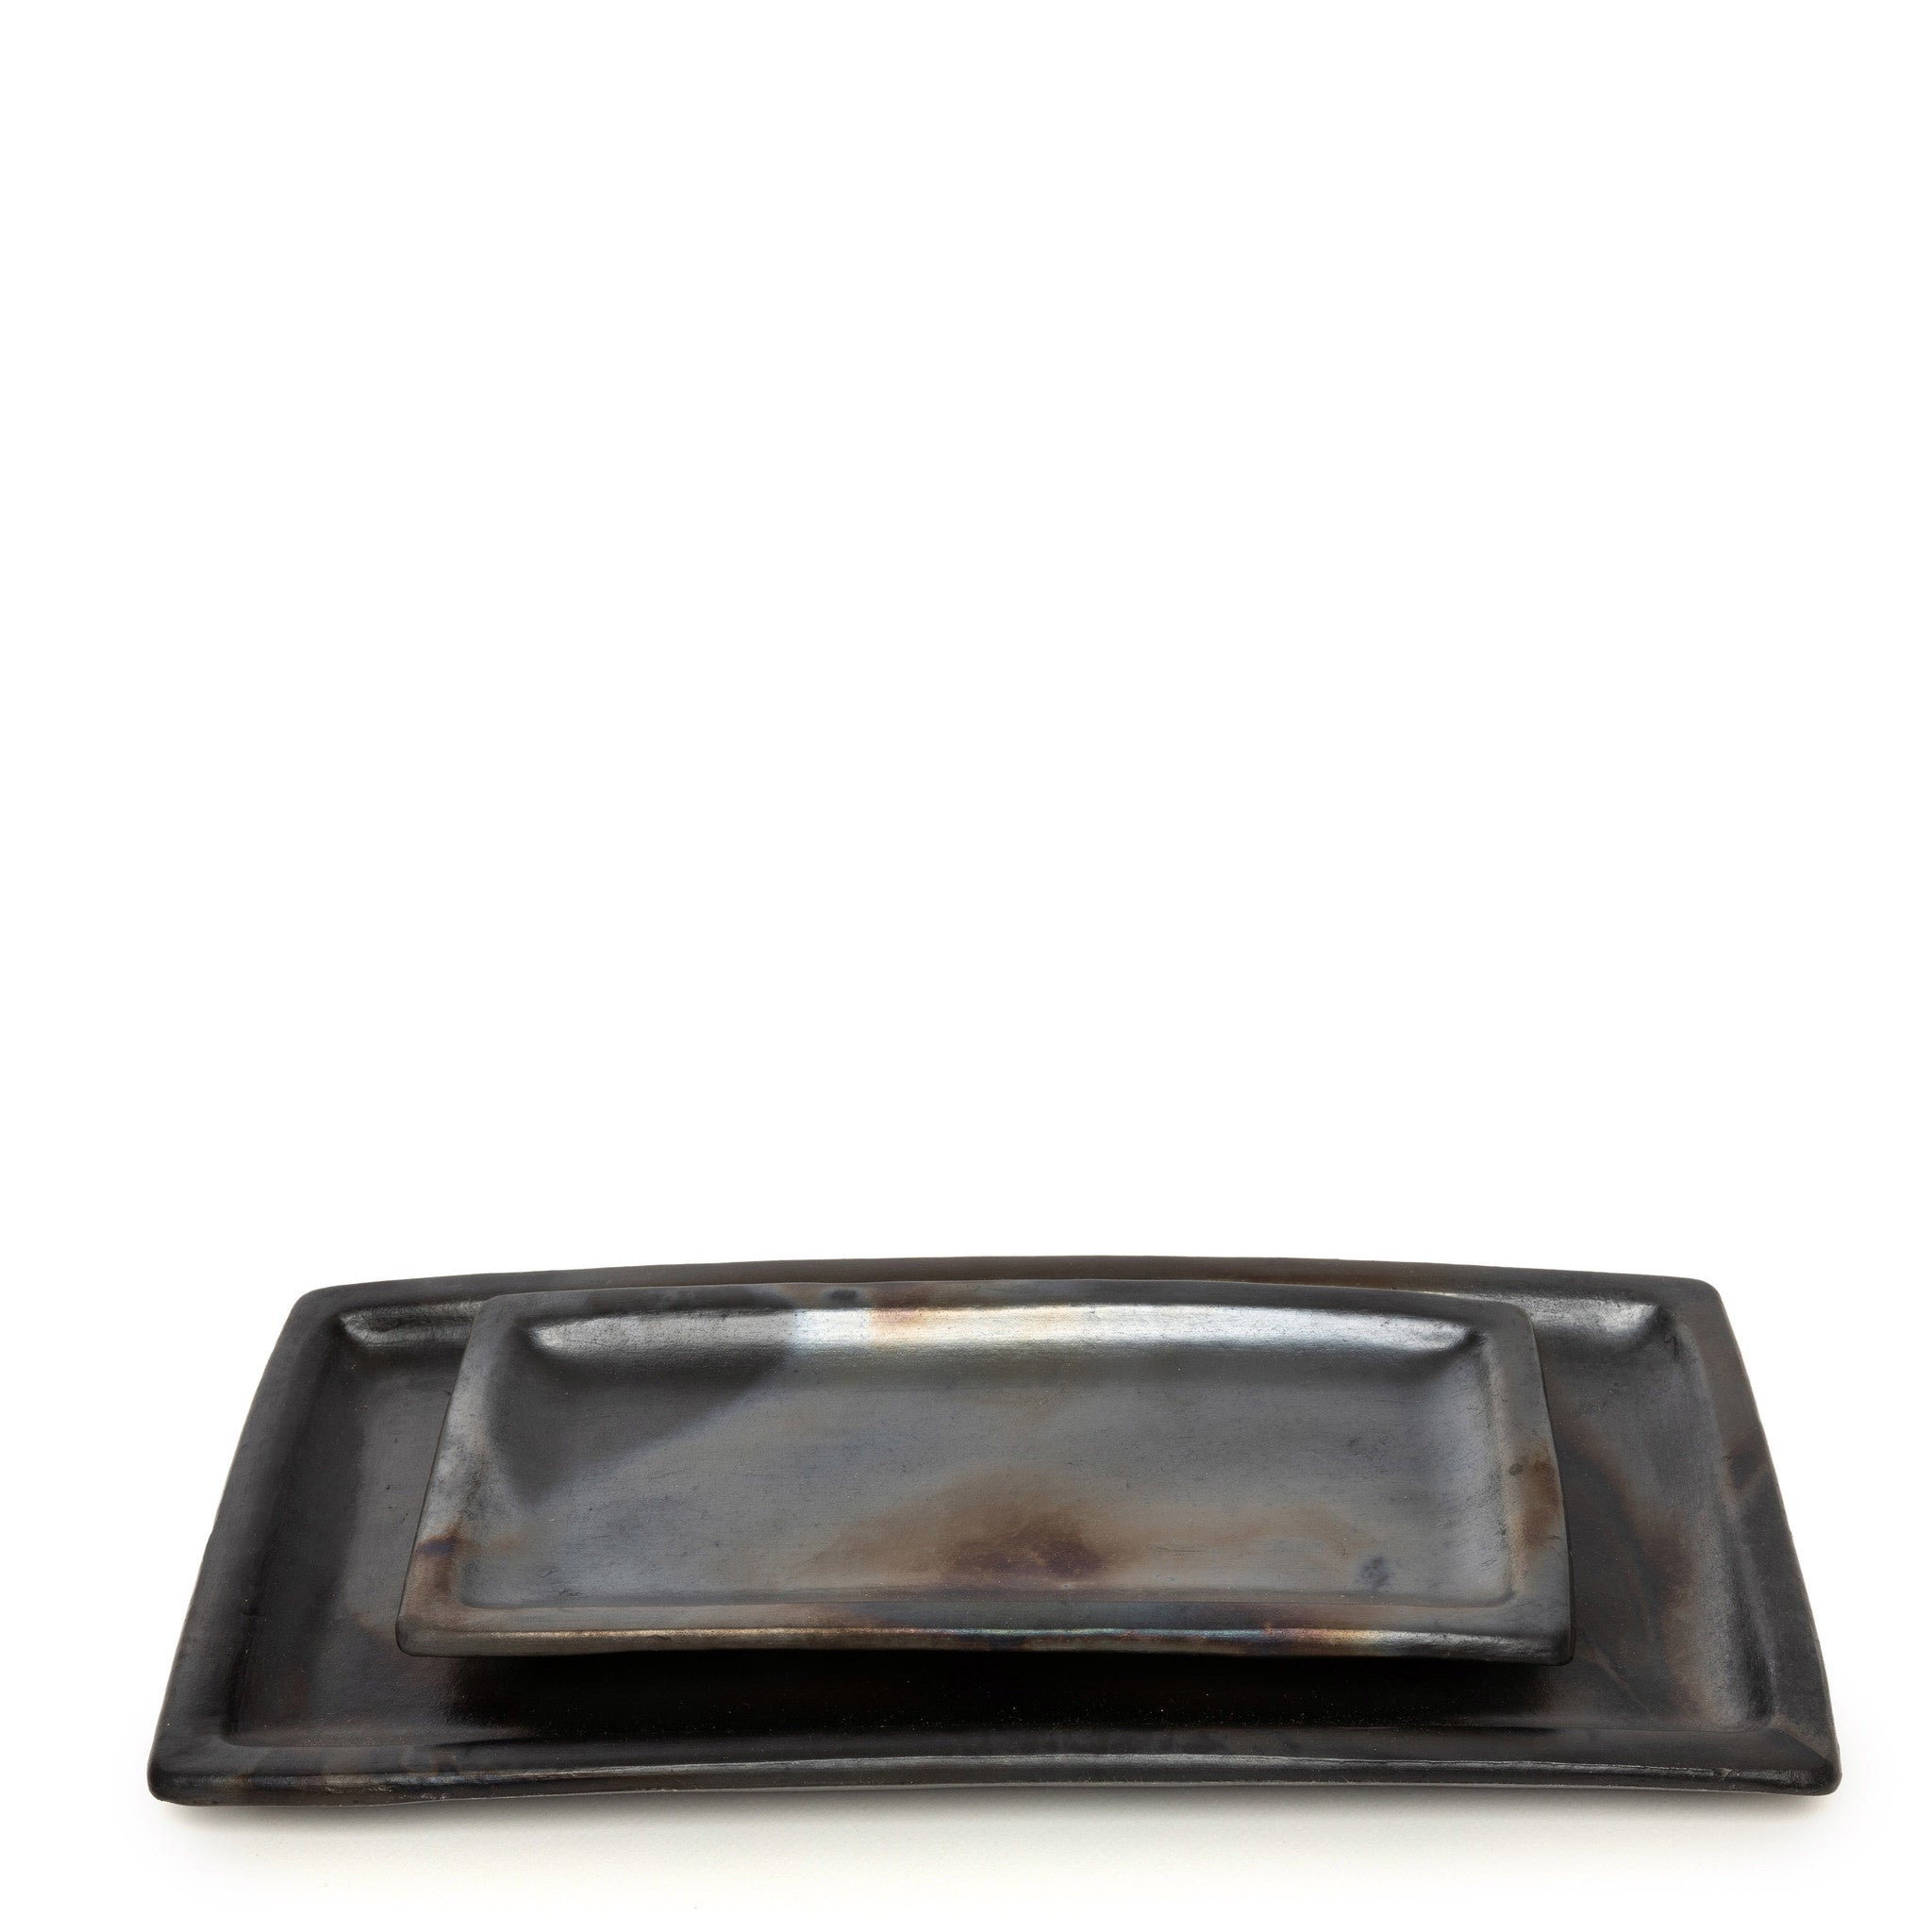 THE BURNED Sushi Plate front view